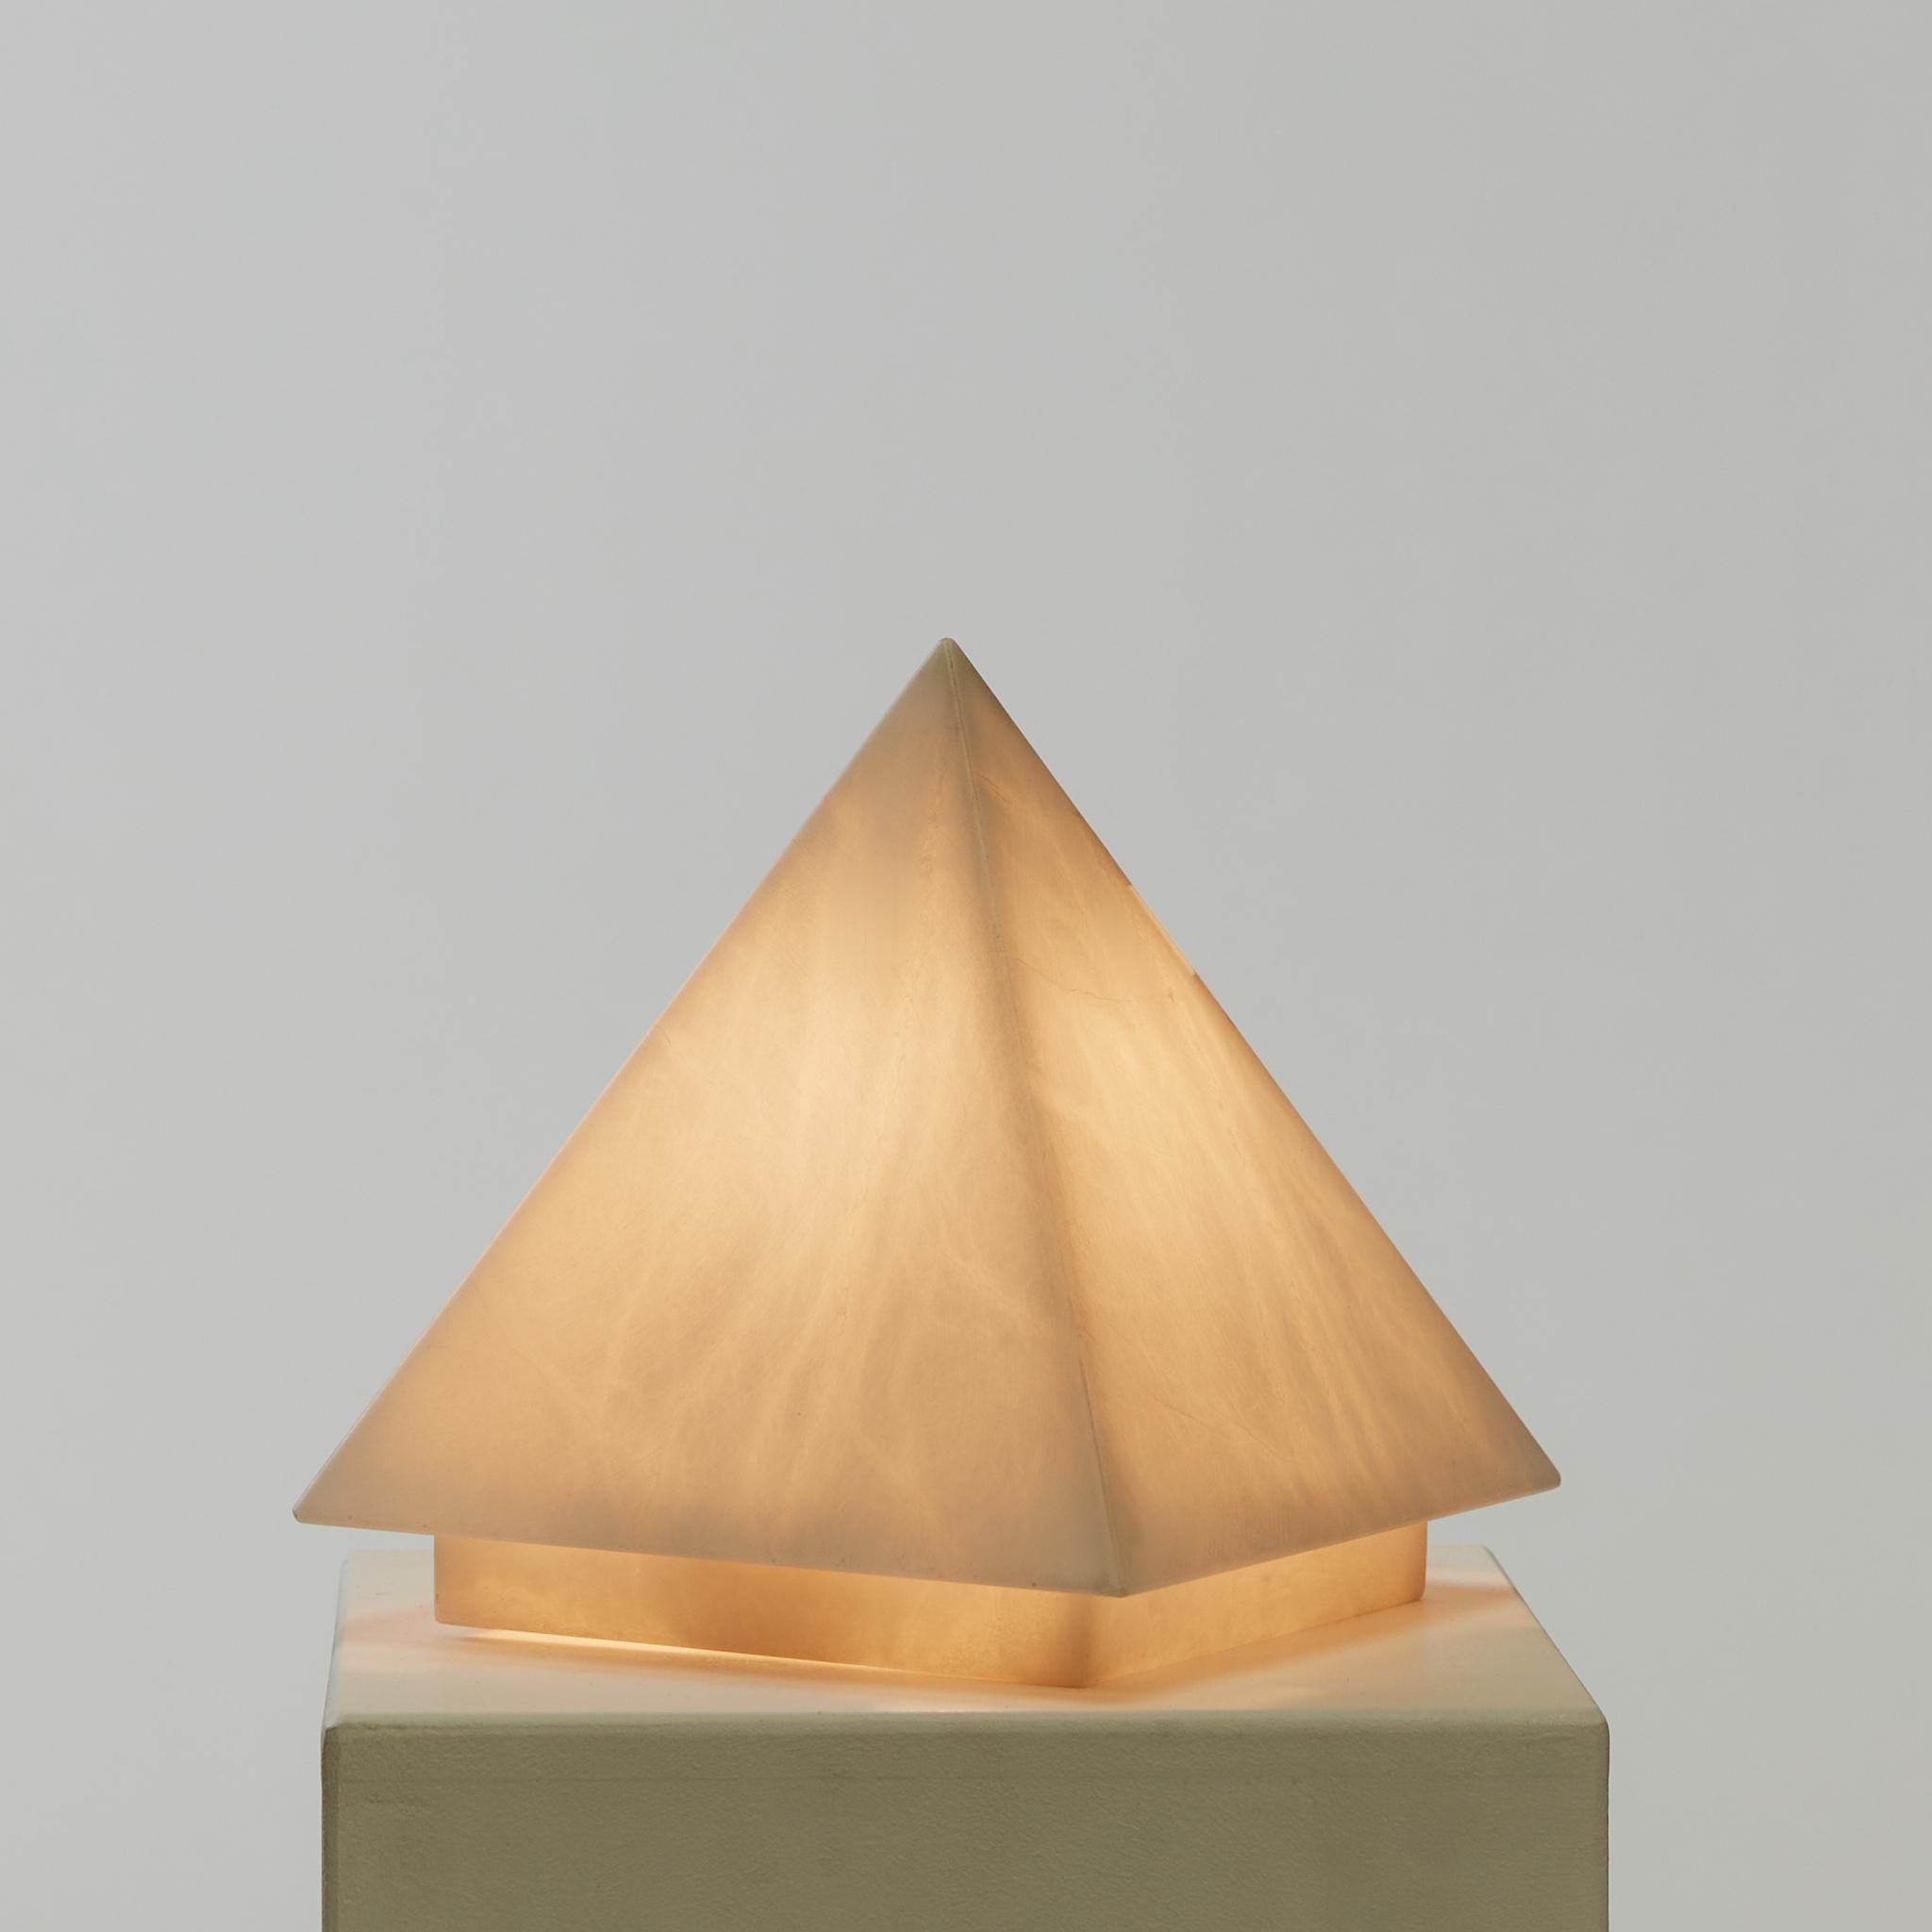 An alabaster pyramid shaped lamp, with a diffused light and rewired with cream silk flex.

PAT tested with new UK plug. 

Period: Circa 1970's

Material: Alabaster

Dimensions: H25 x W23 x D23cm

Condition: Vintage condition - no chips or